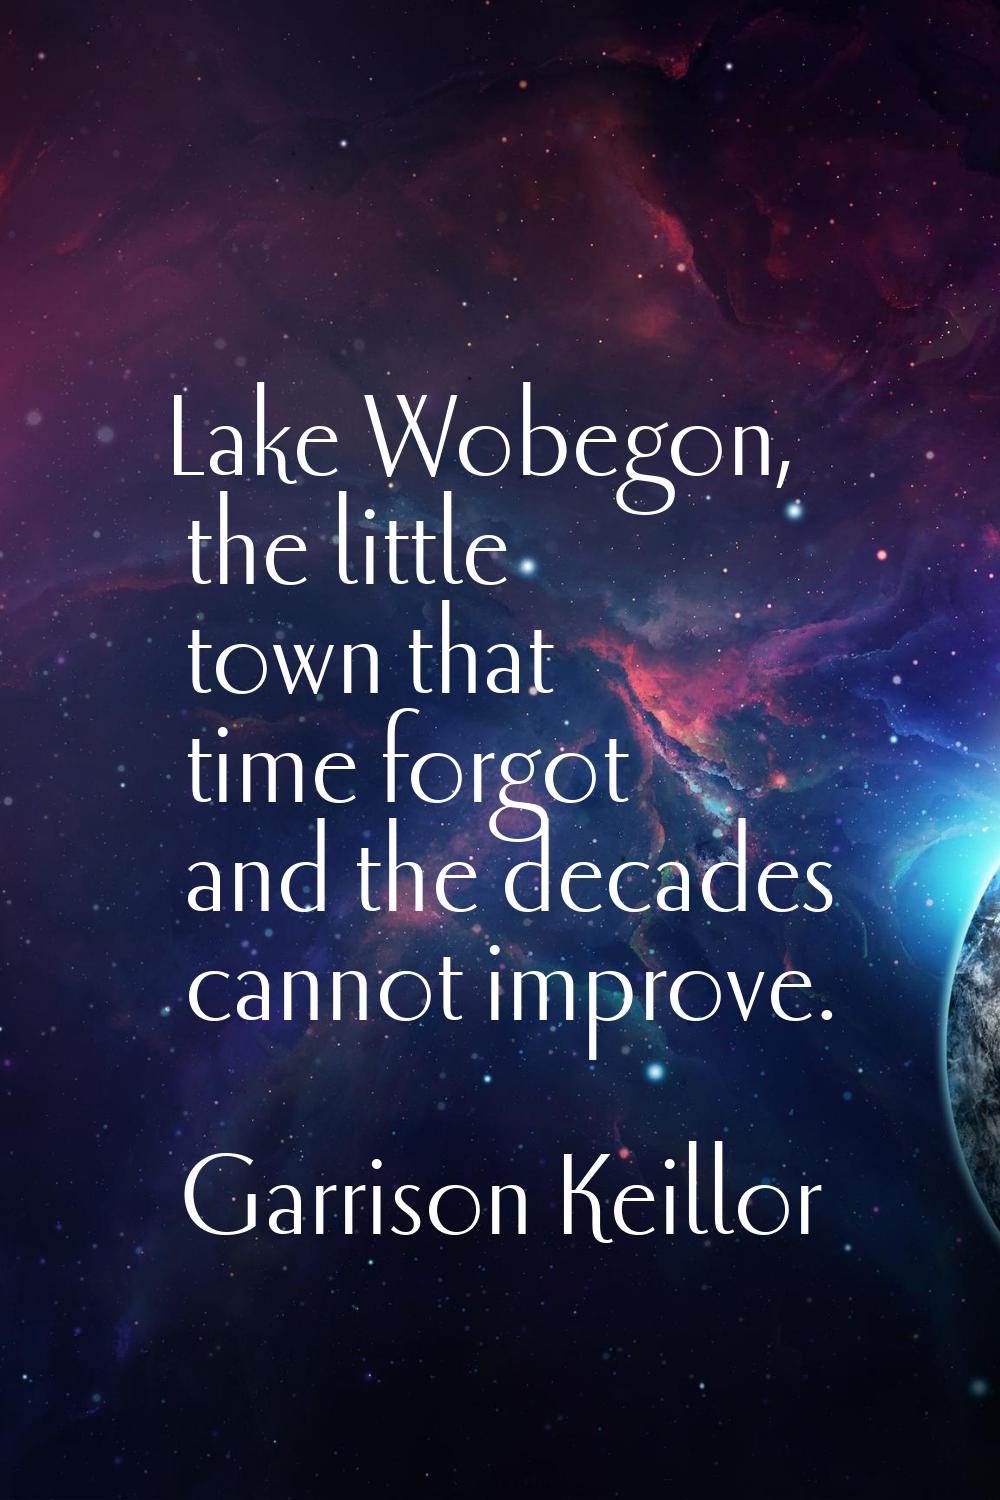 Lake Wobegon, the little town that time forgot and the decades cannot improve.